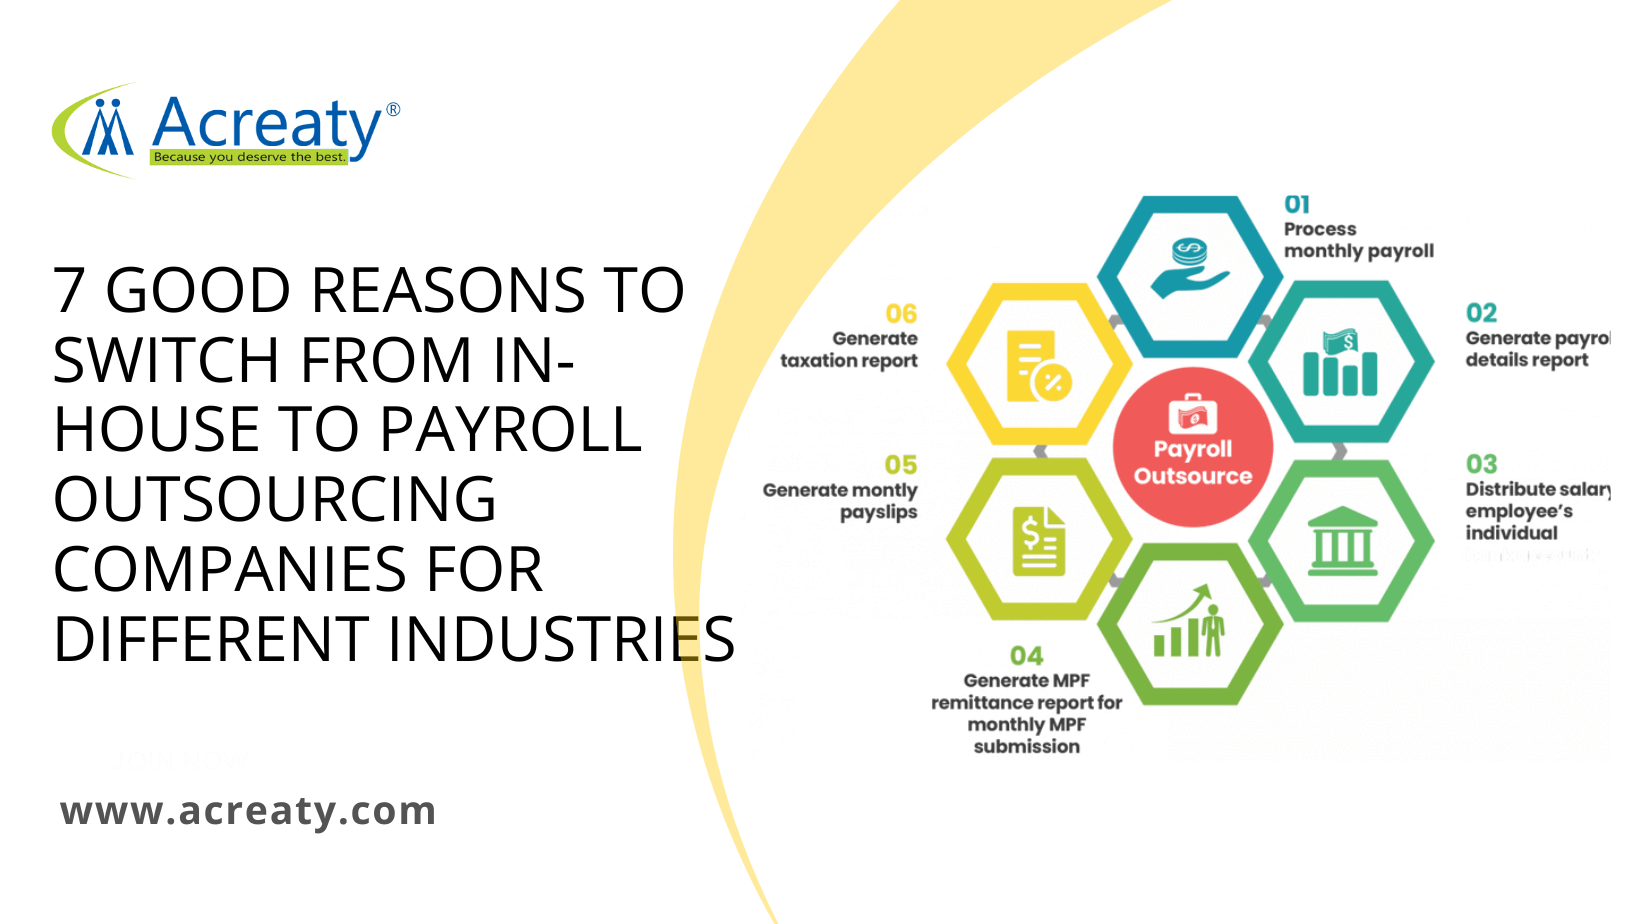 7 Good Reasons to switch from in-house to payroll outsourcing companies for different industries